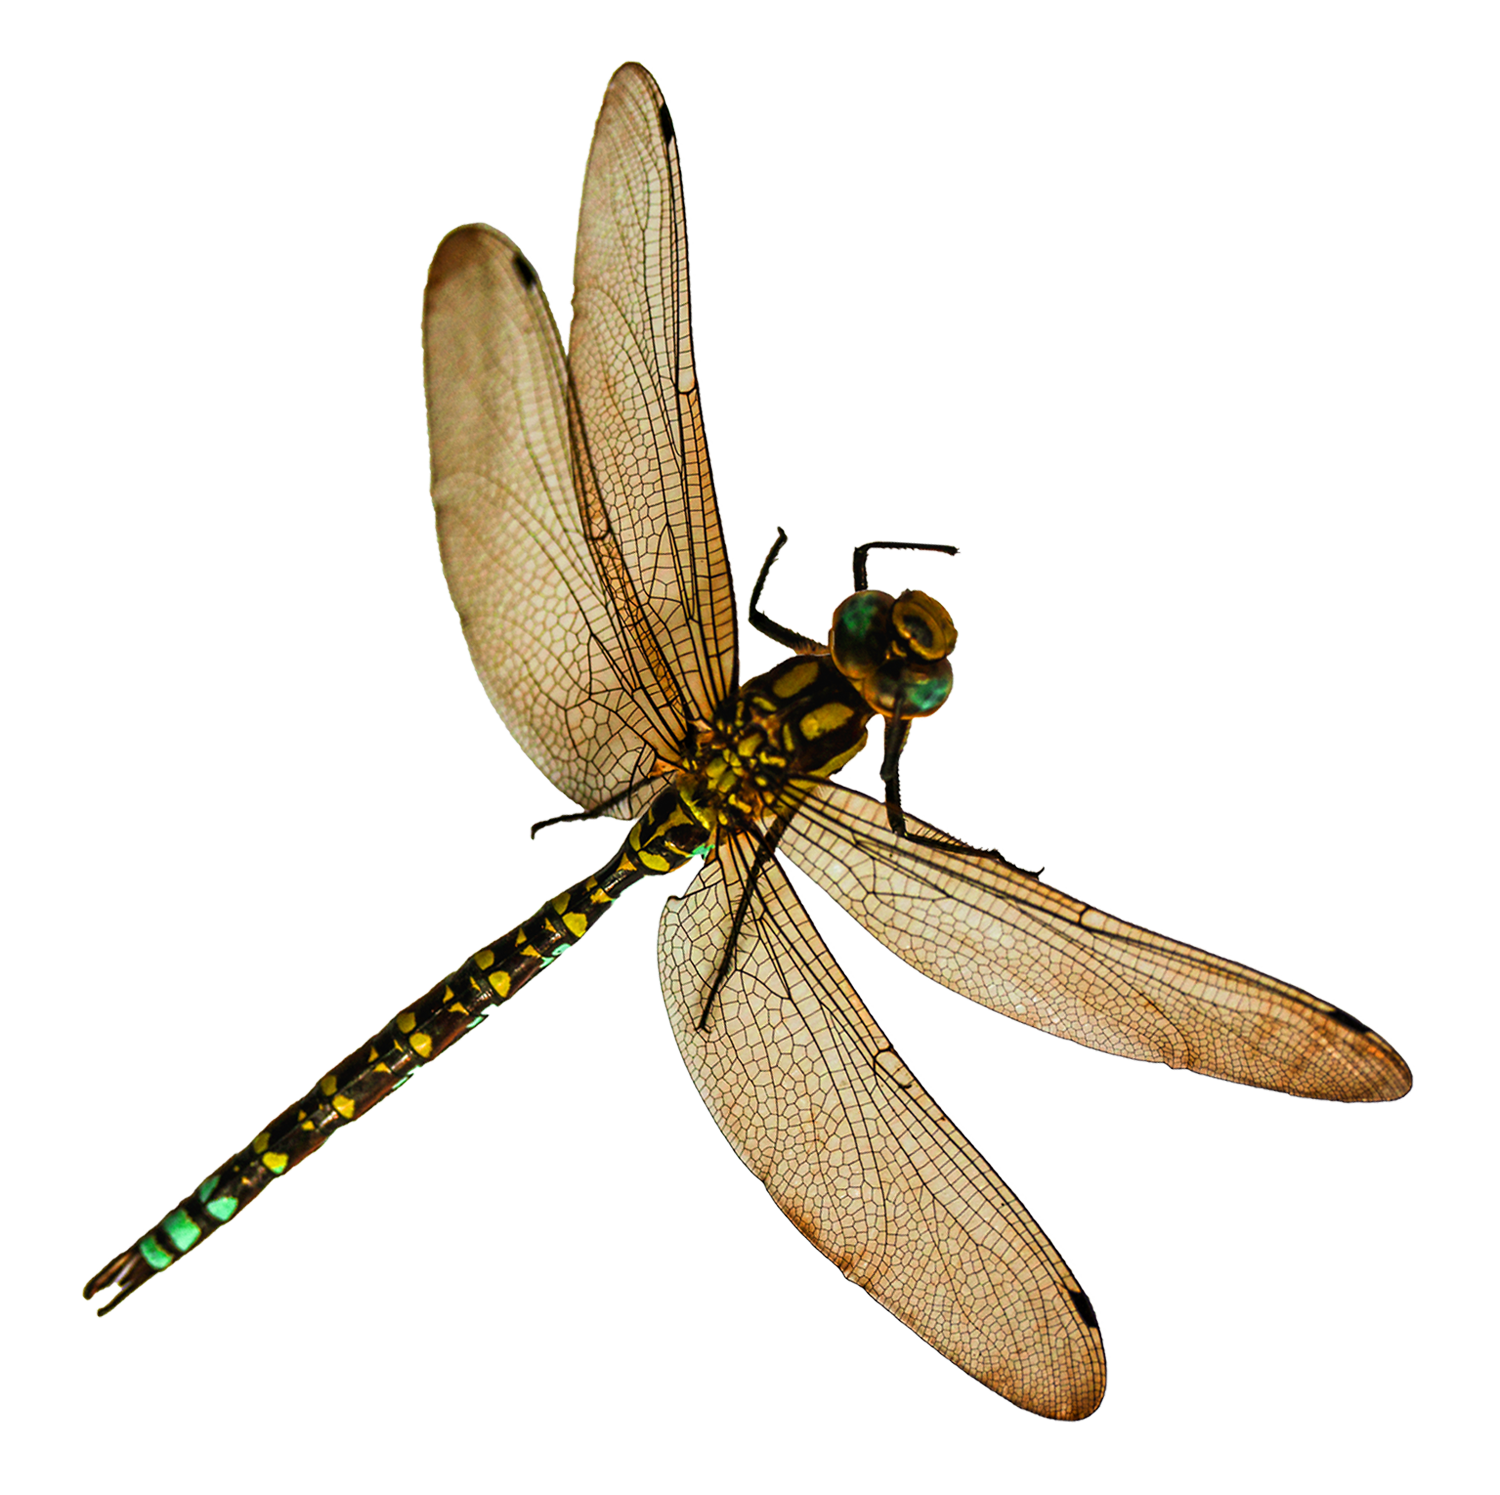 A Dragonfly With Wings